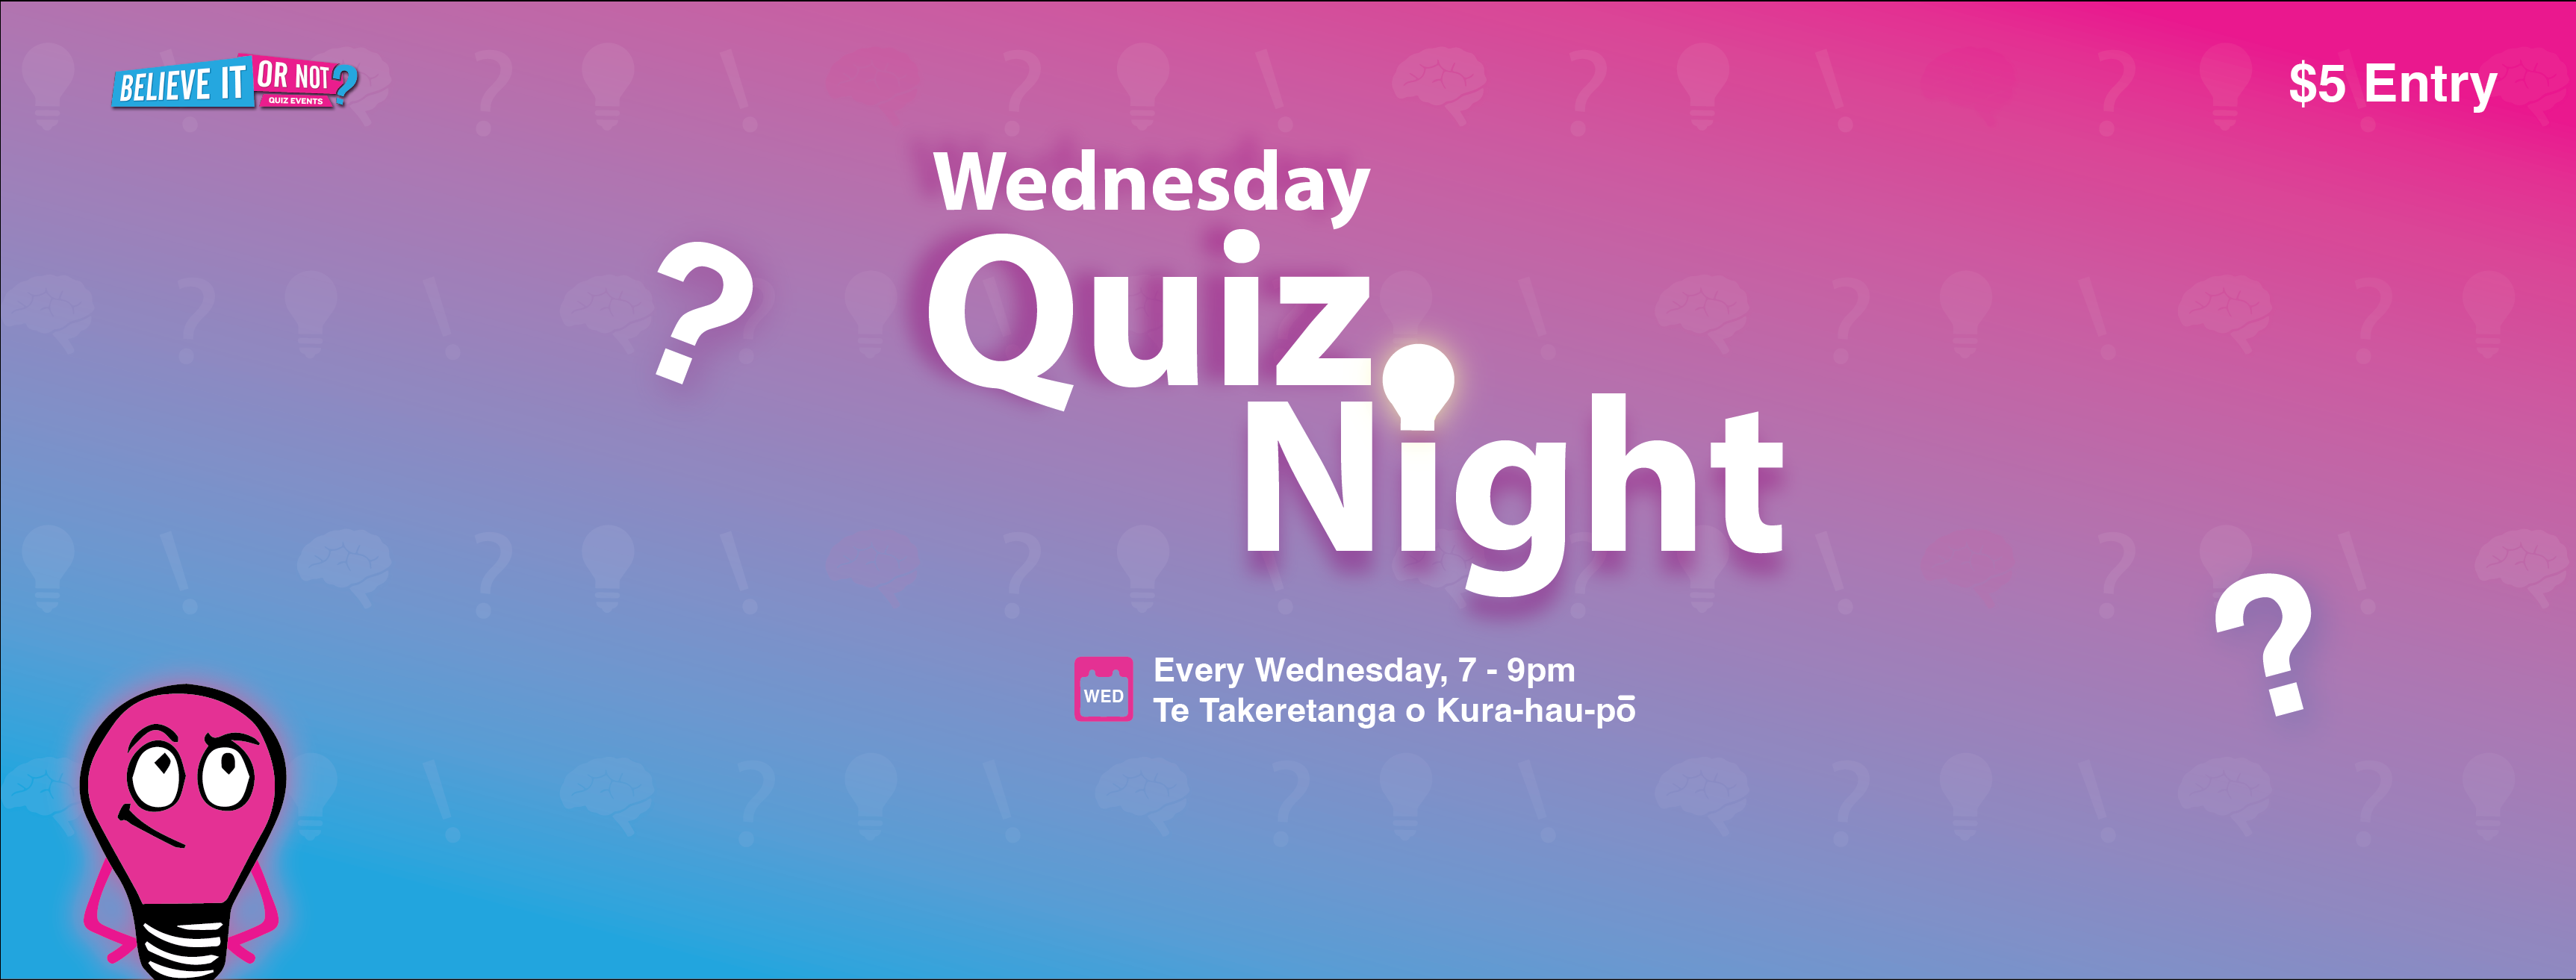 Quiz Night, every Wednesday 7 to 9pm. $5 entry.